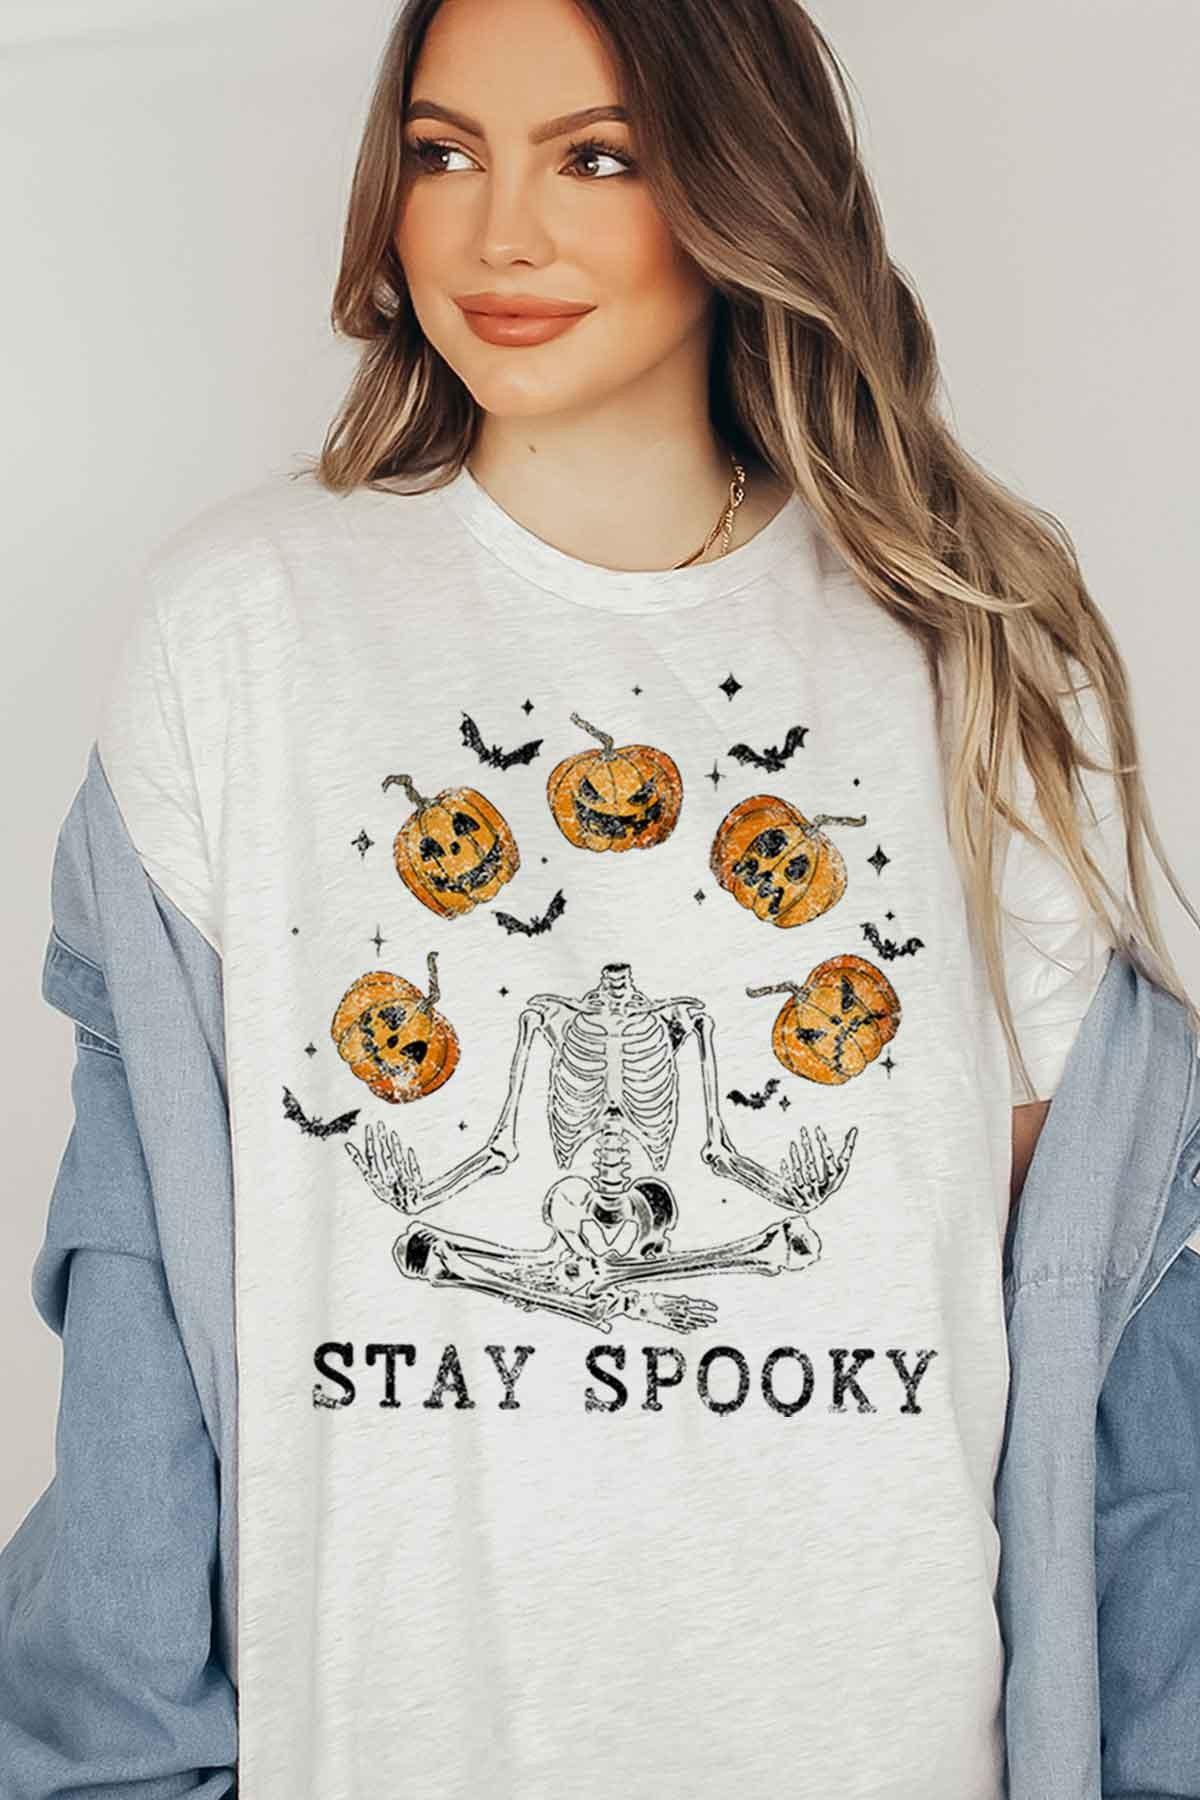 STAY SPOOKY TEE (SMALL & XL LEFT) , T-SHIRT , it’sNOMB. The Label , DANCING SKELETONS TEE, GRAPHIC, GRAPHIC TEE, graphic tees, HALLOWEEN, HALLOWEEN TEES, HALLOWEEN TSHIRTS, SKELETONS AND PUMPKINS TEE, STAY SPOOKY TEE, T-SHIRT, T-SHIRTS, TEES , It's NOMB , itsnomb.com